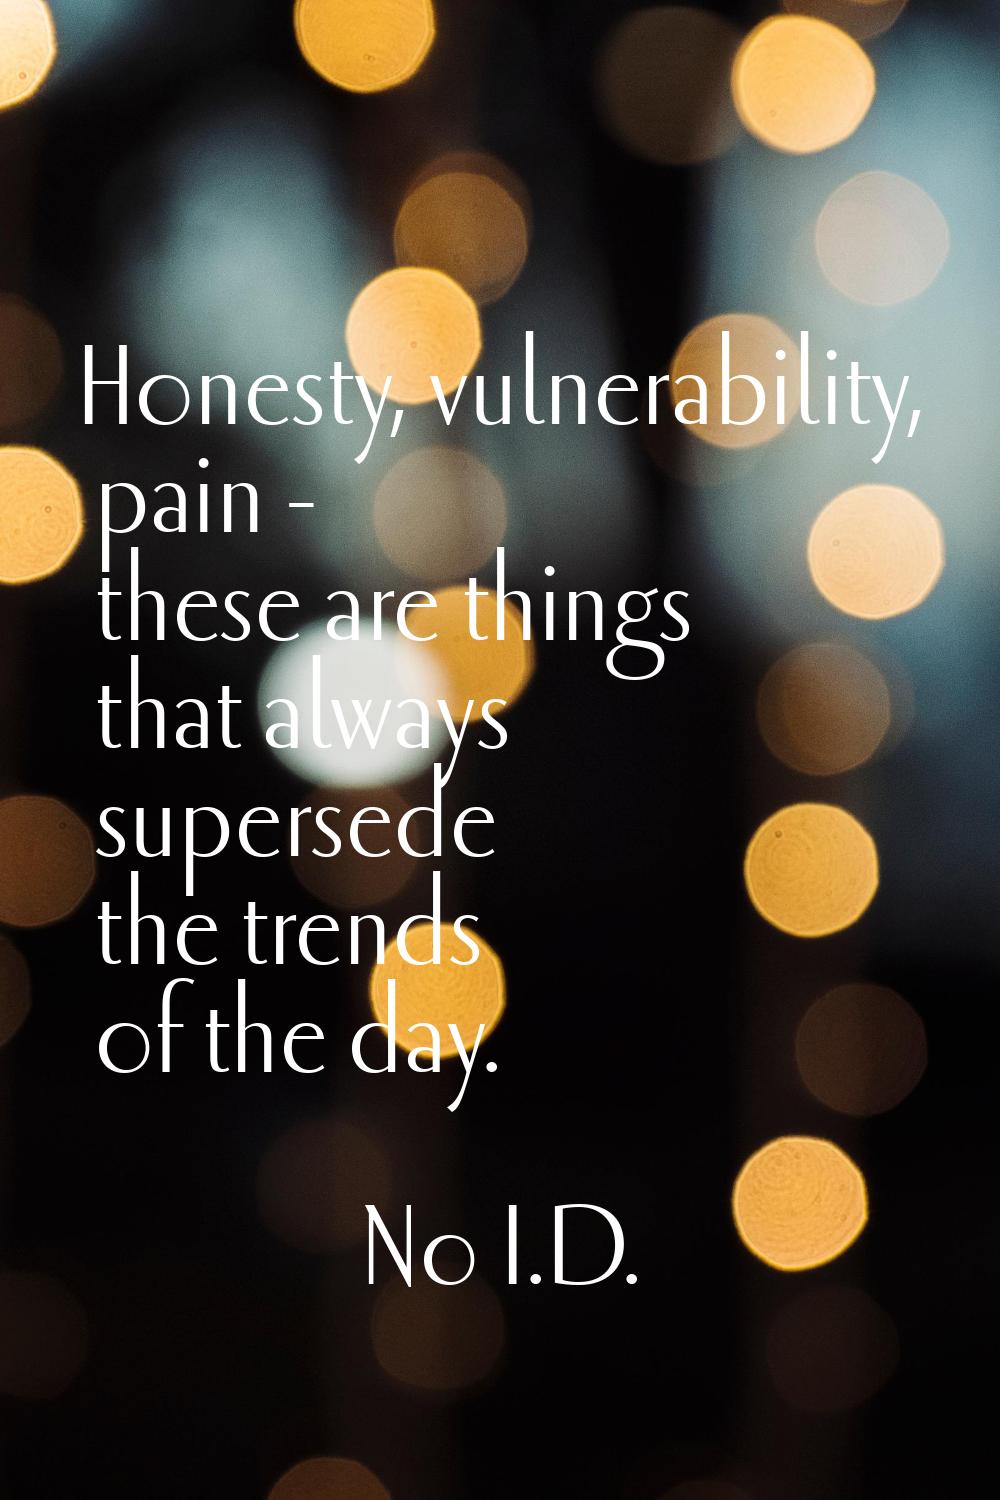 Honesty, vulnerability, pain - these are things that always supersede the trends of the day.